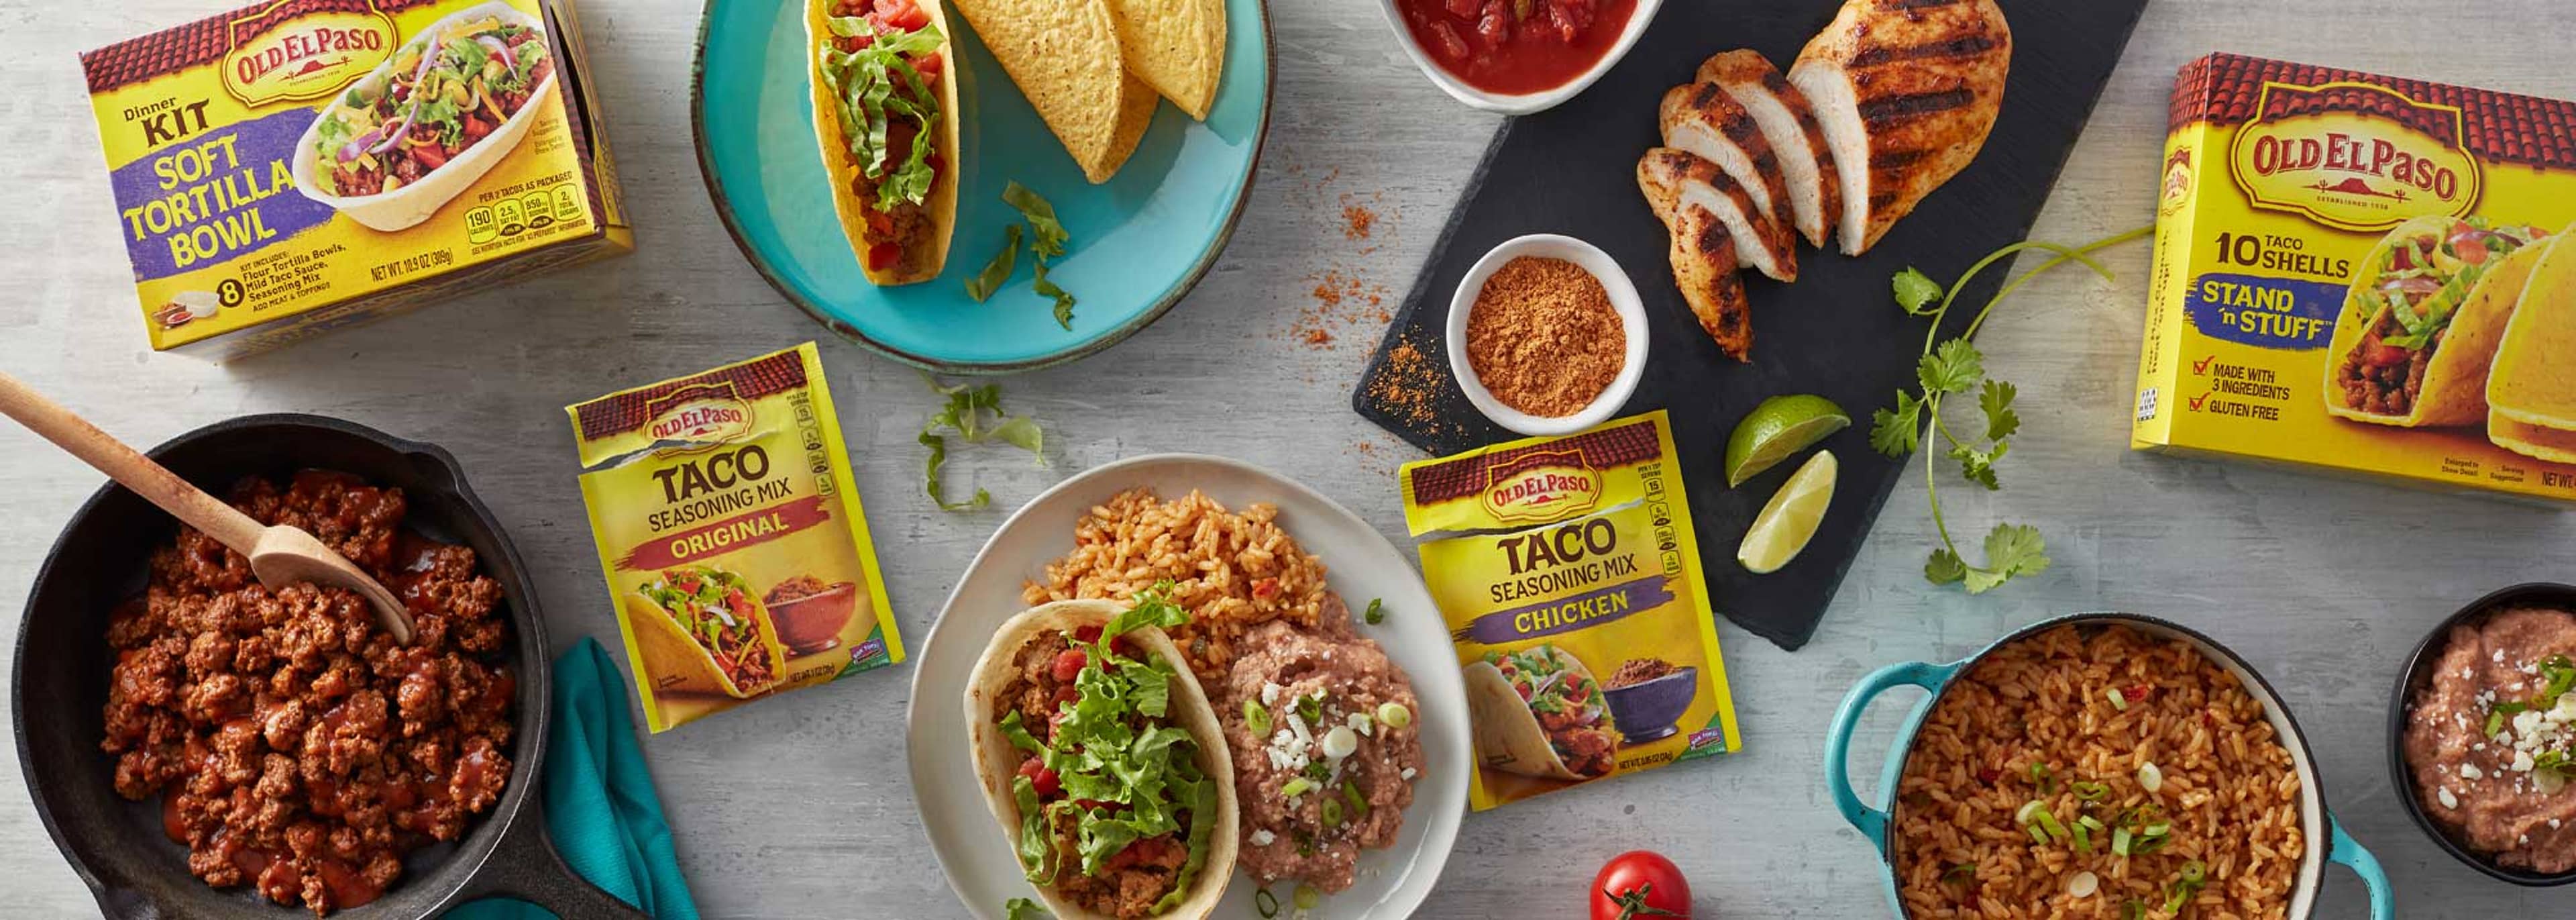 An array of different Old El Paso products